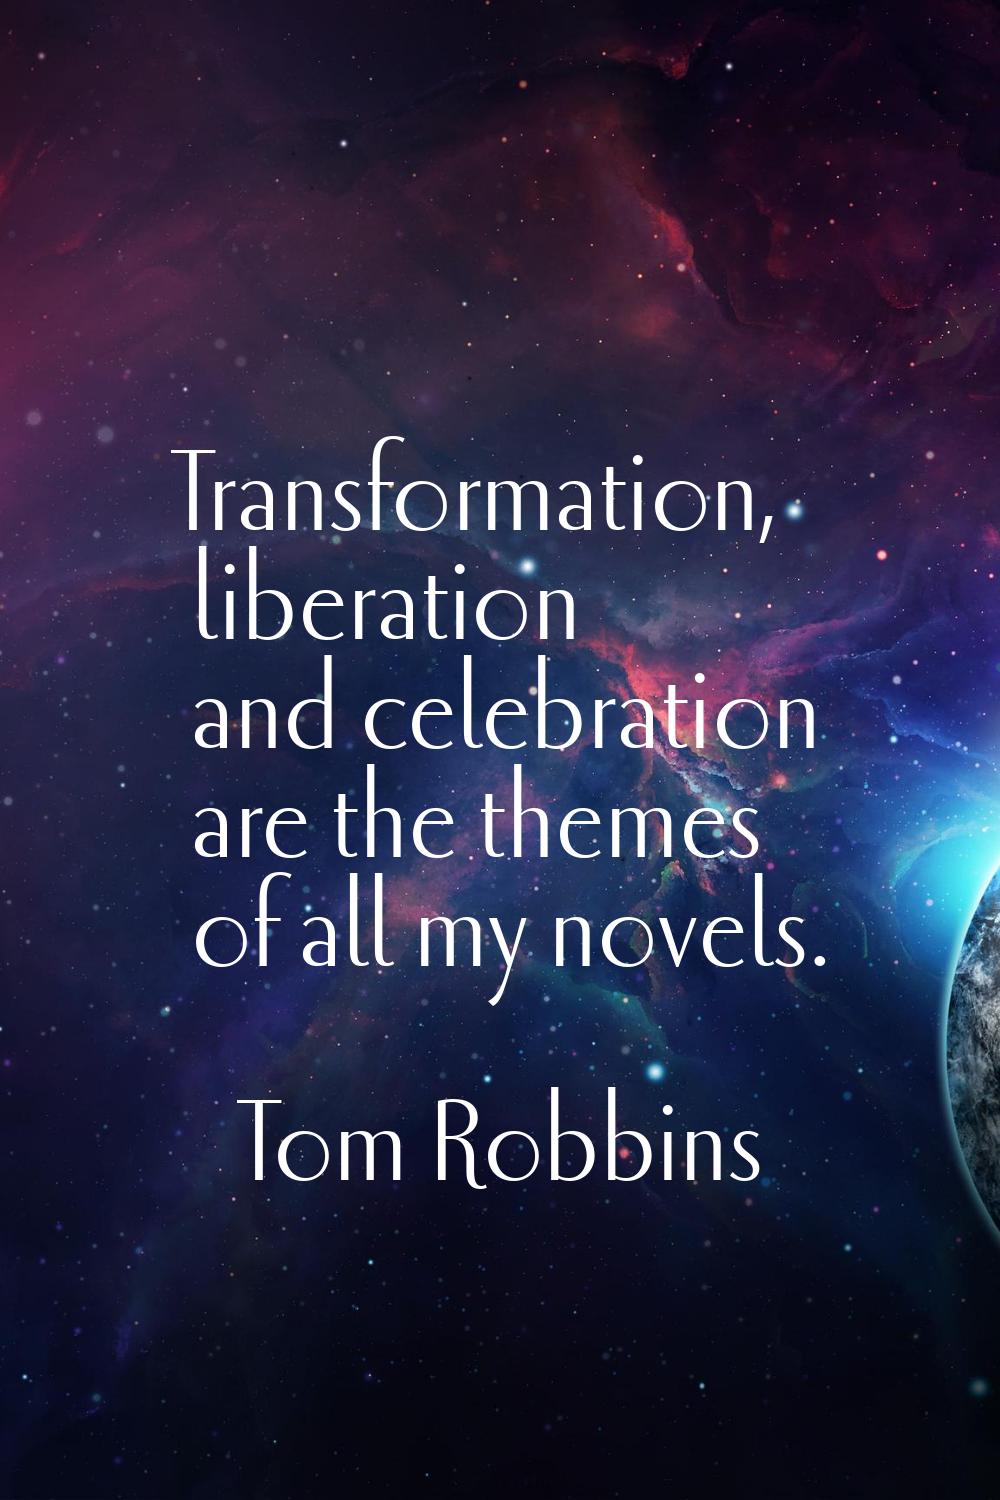 Transformation, liberation and celebration are the themes of all my novels.